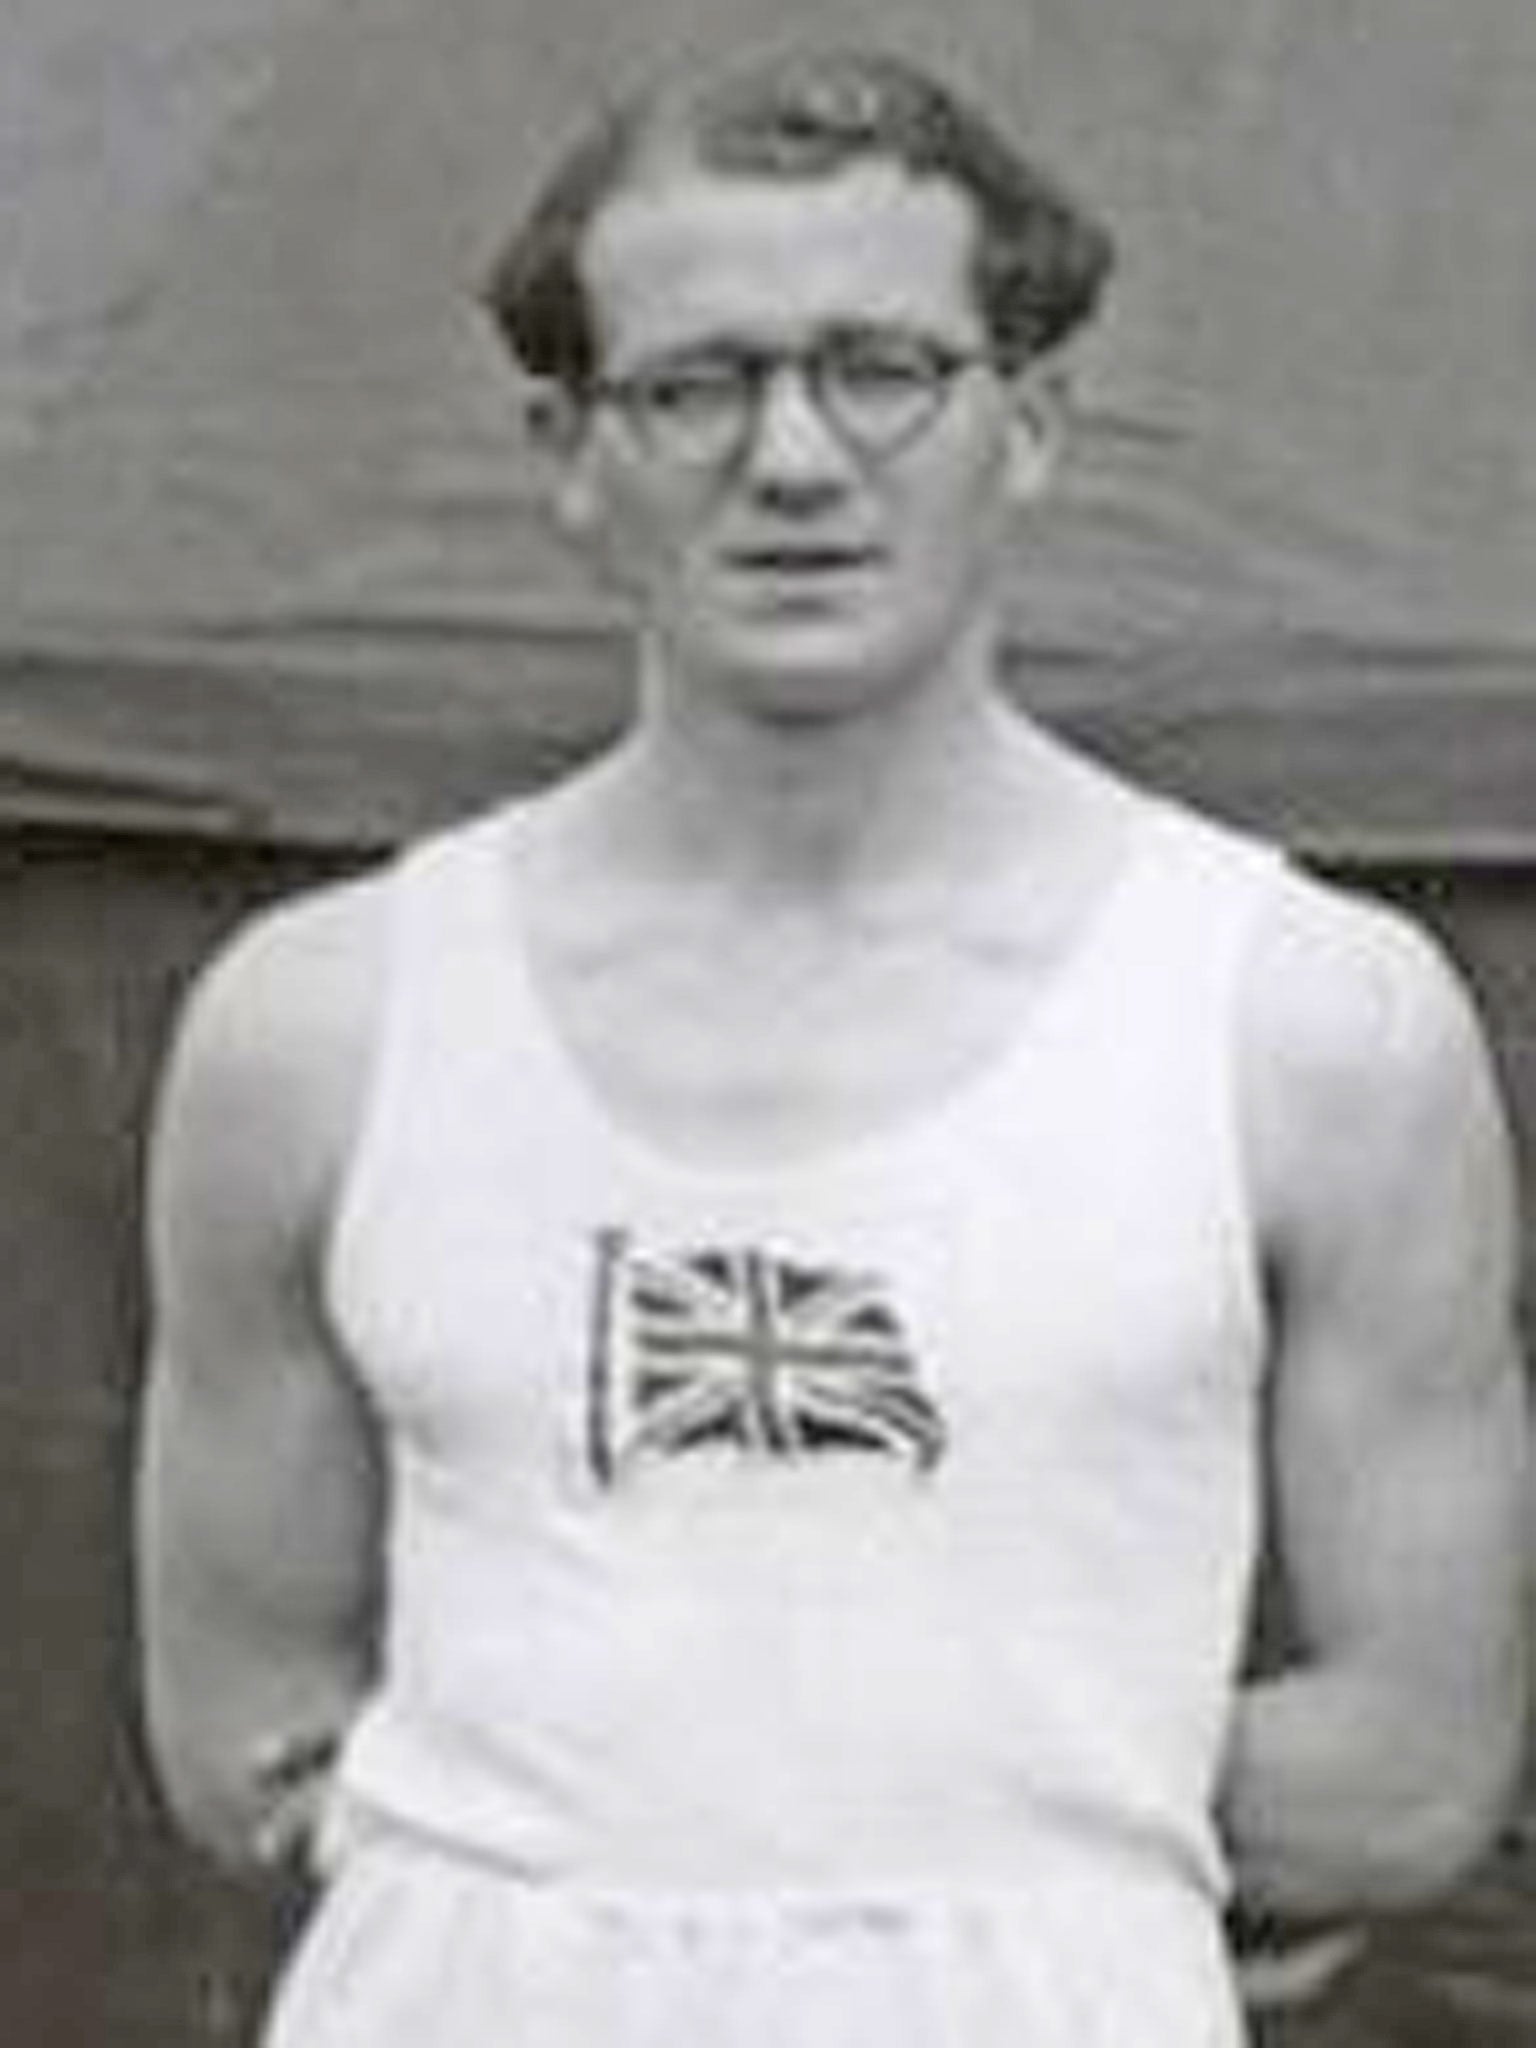 Peter Duckworth, soldier and olympian